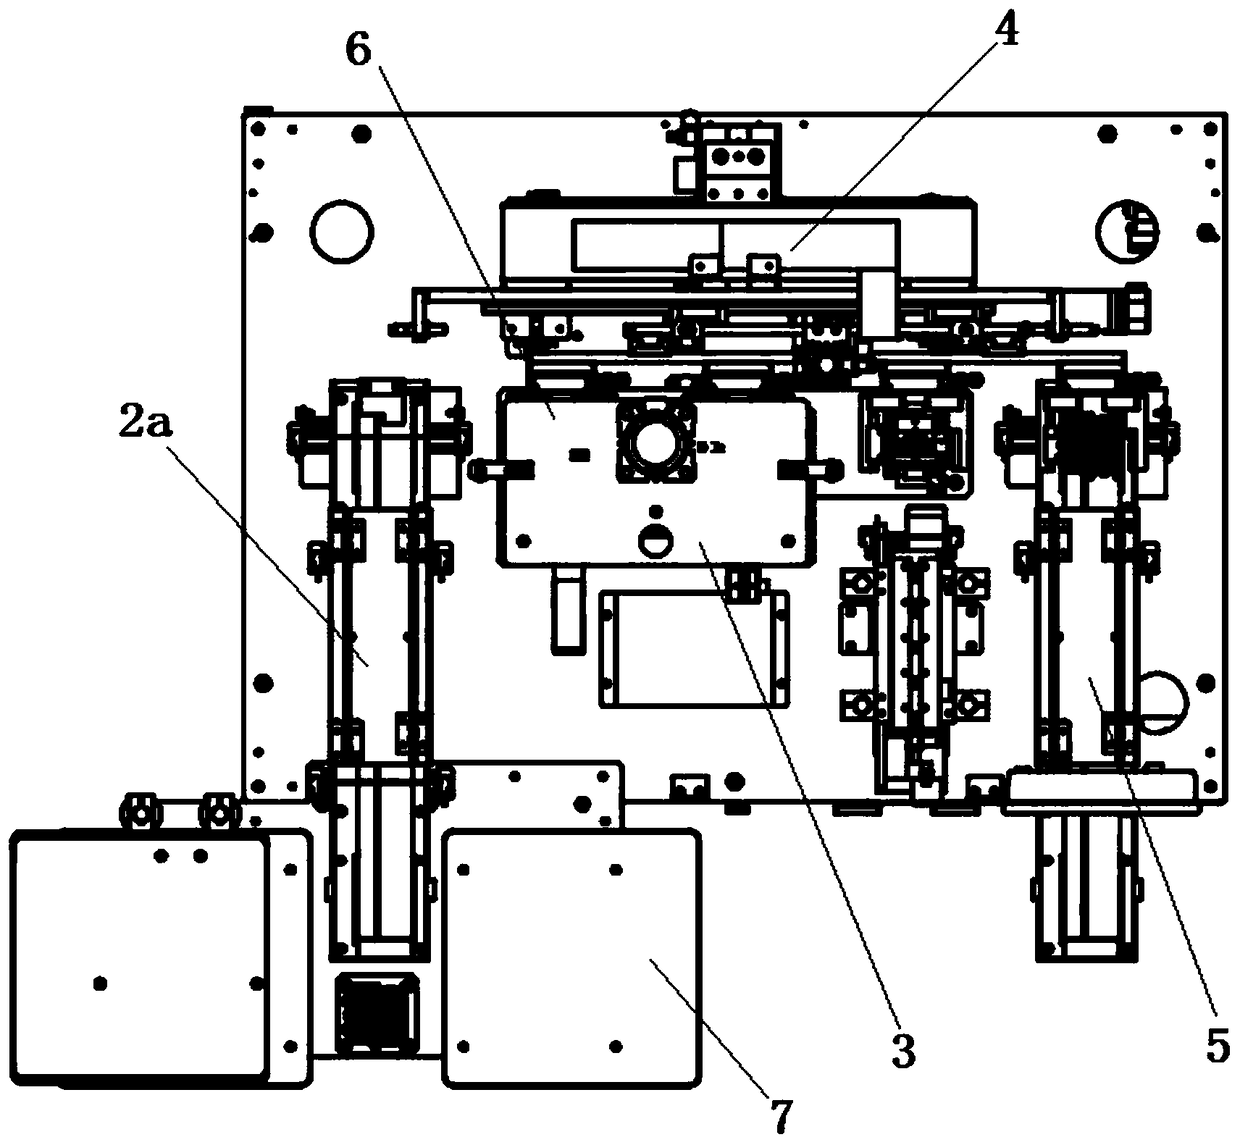 Hardware assembled product assembly inspection device